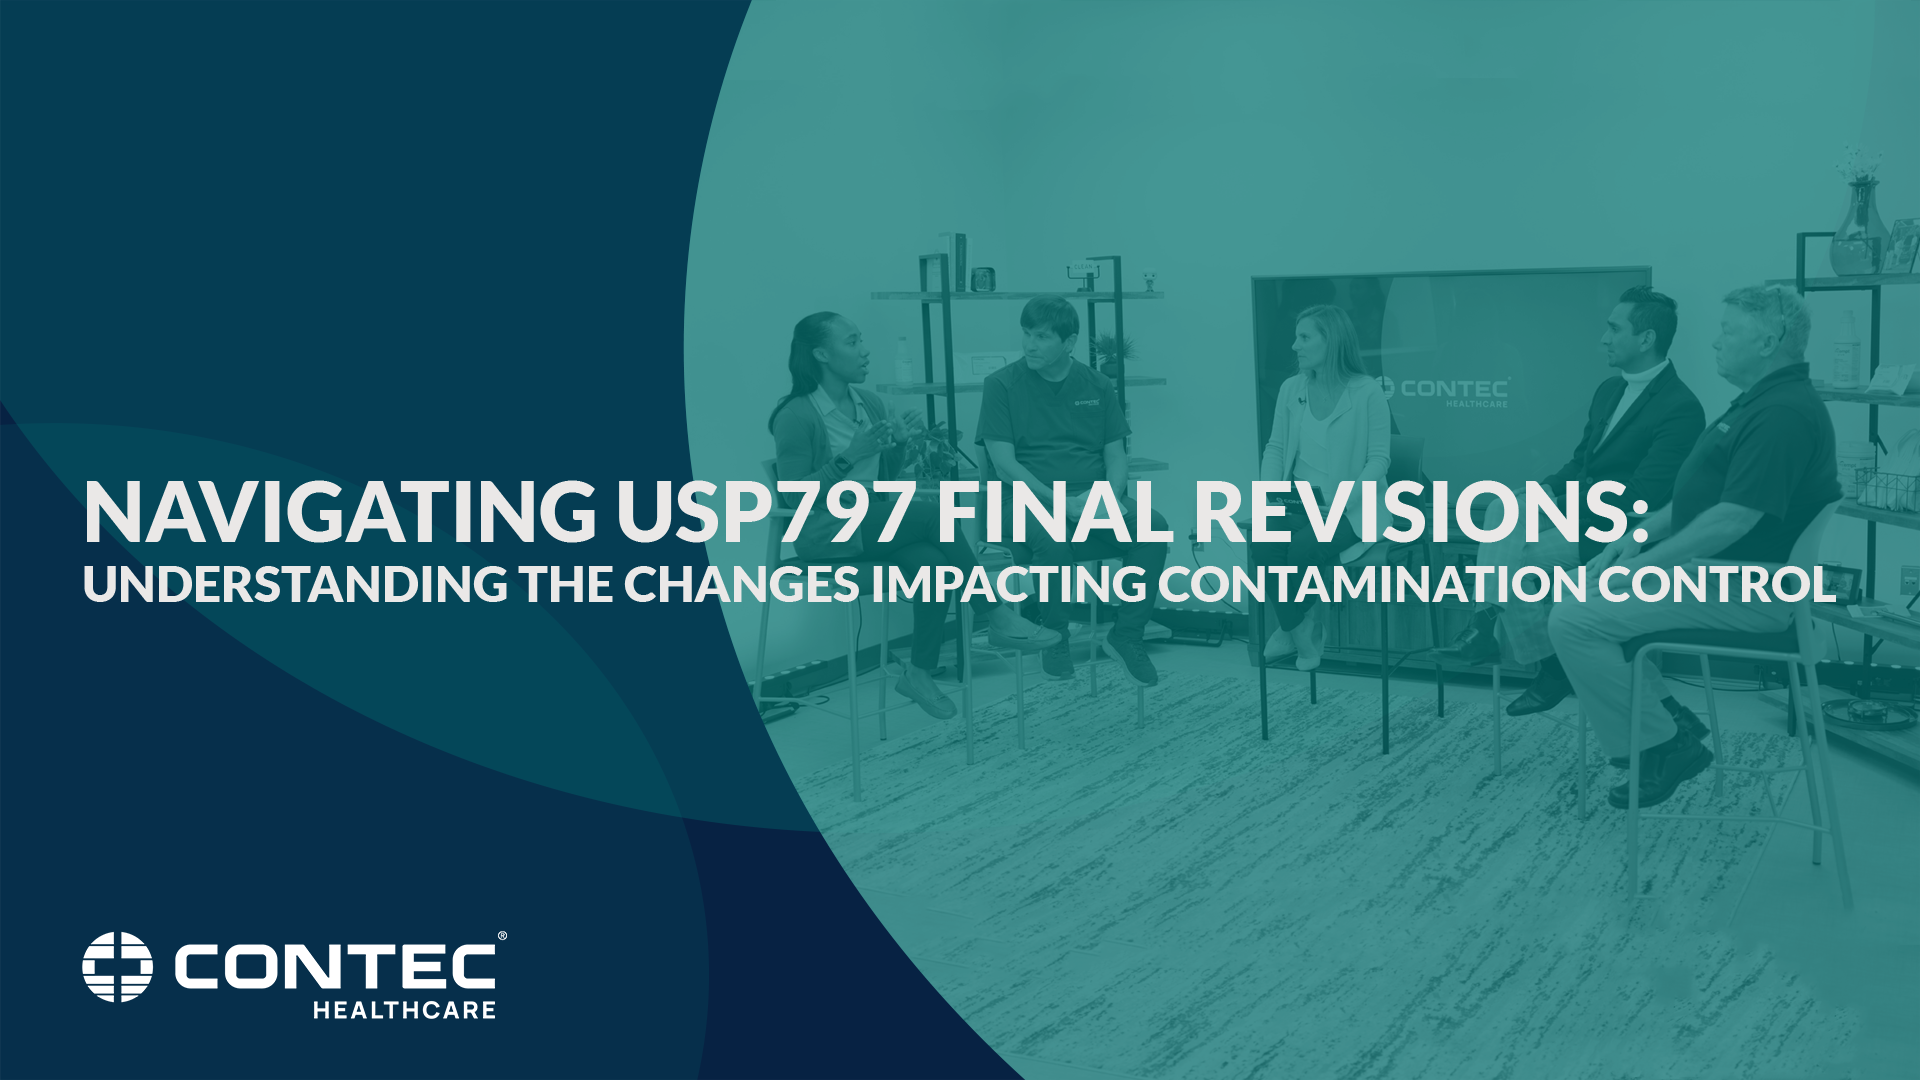 Image of Navigating USP <797> Final Revisions: Understanding the Changes Impacting Contamination Control